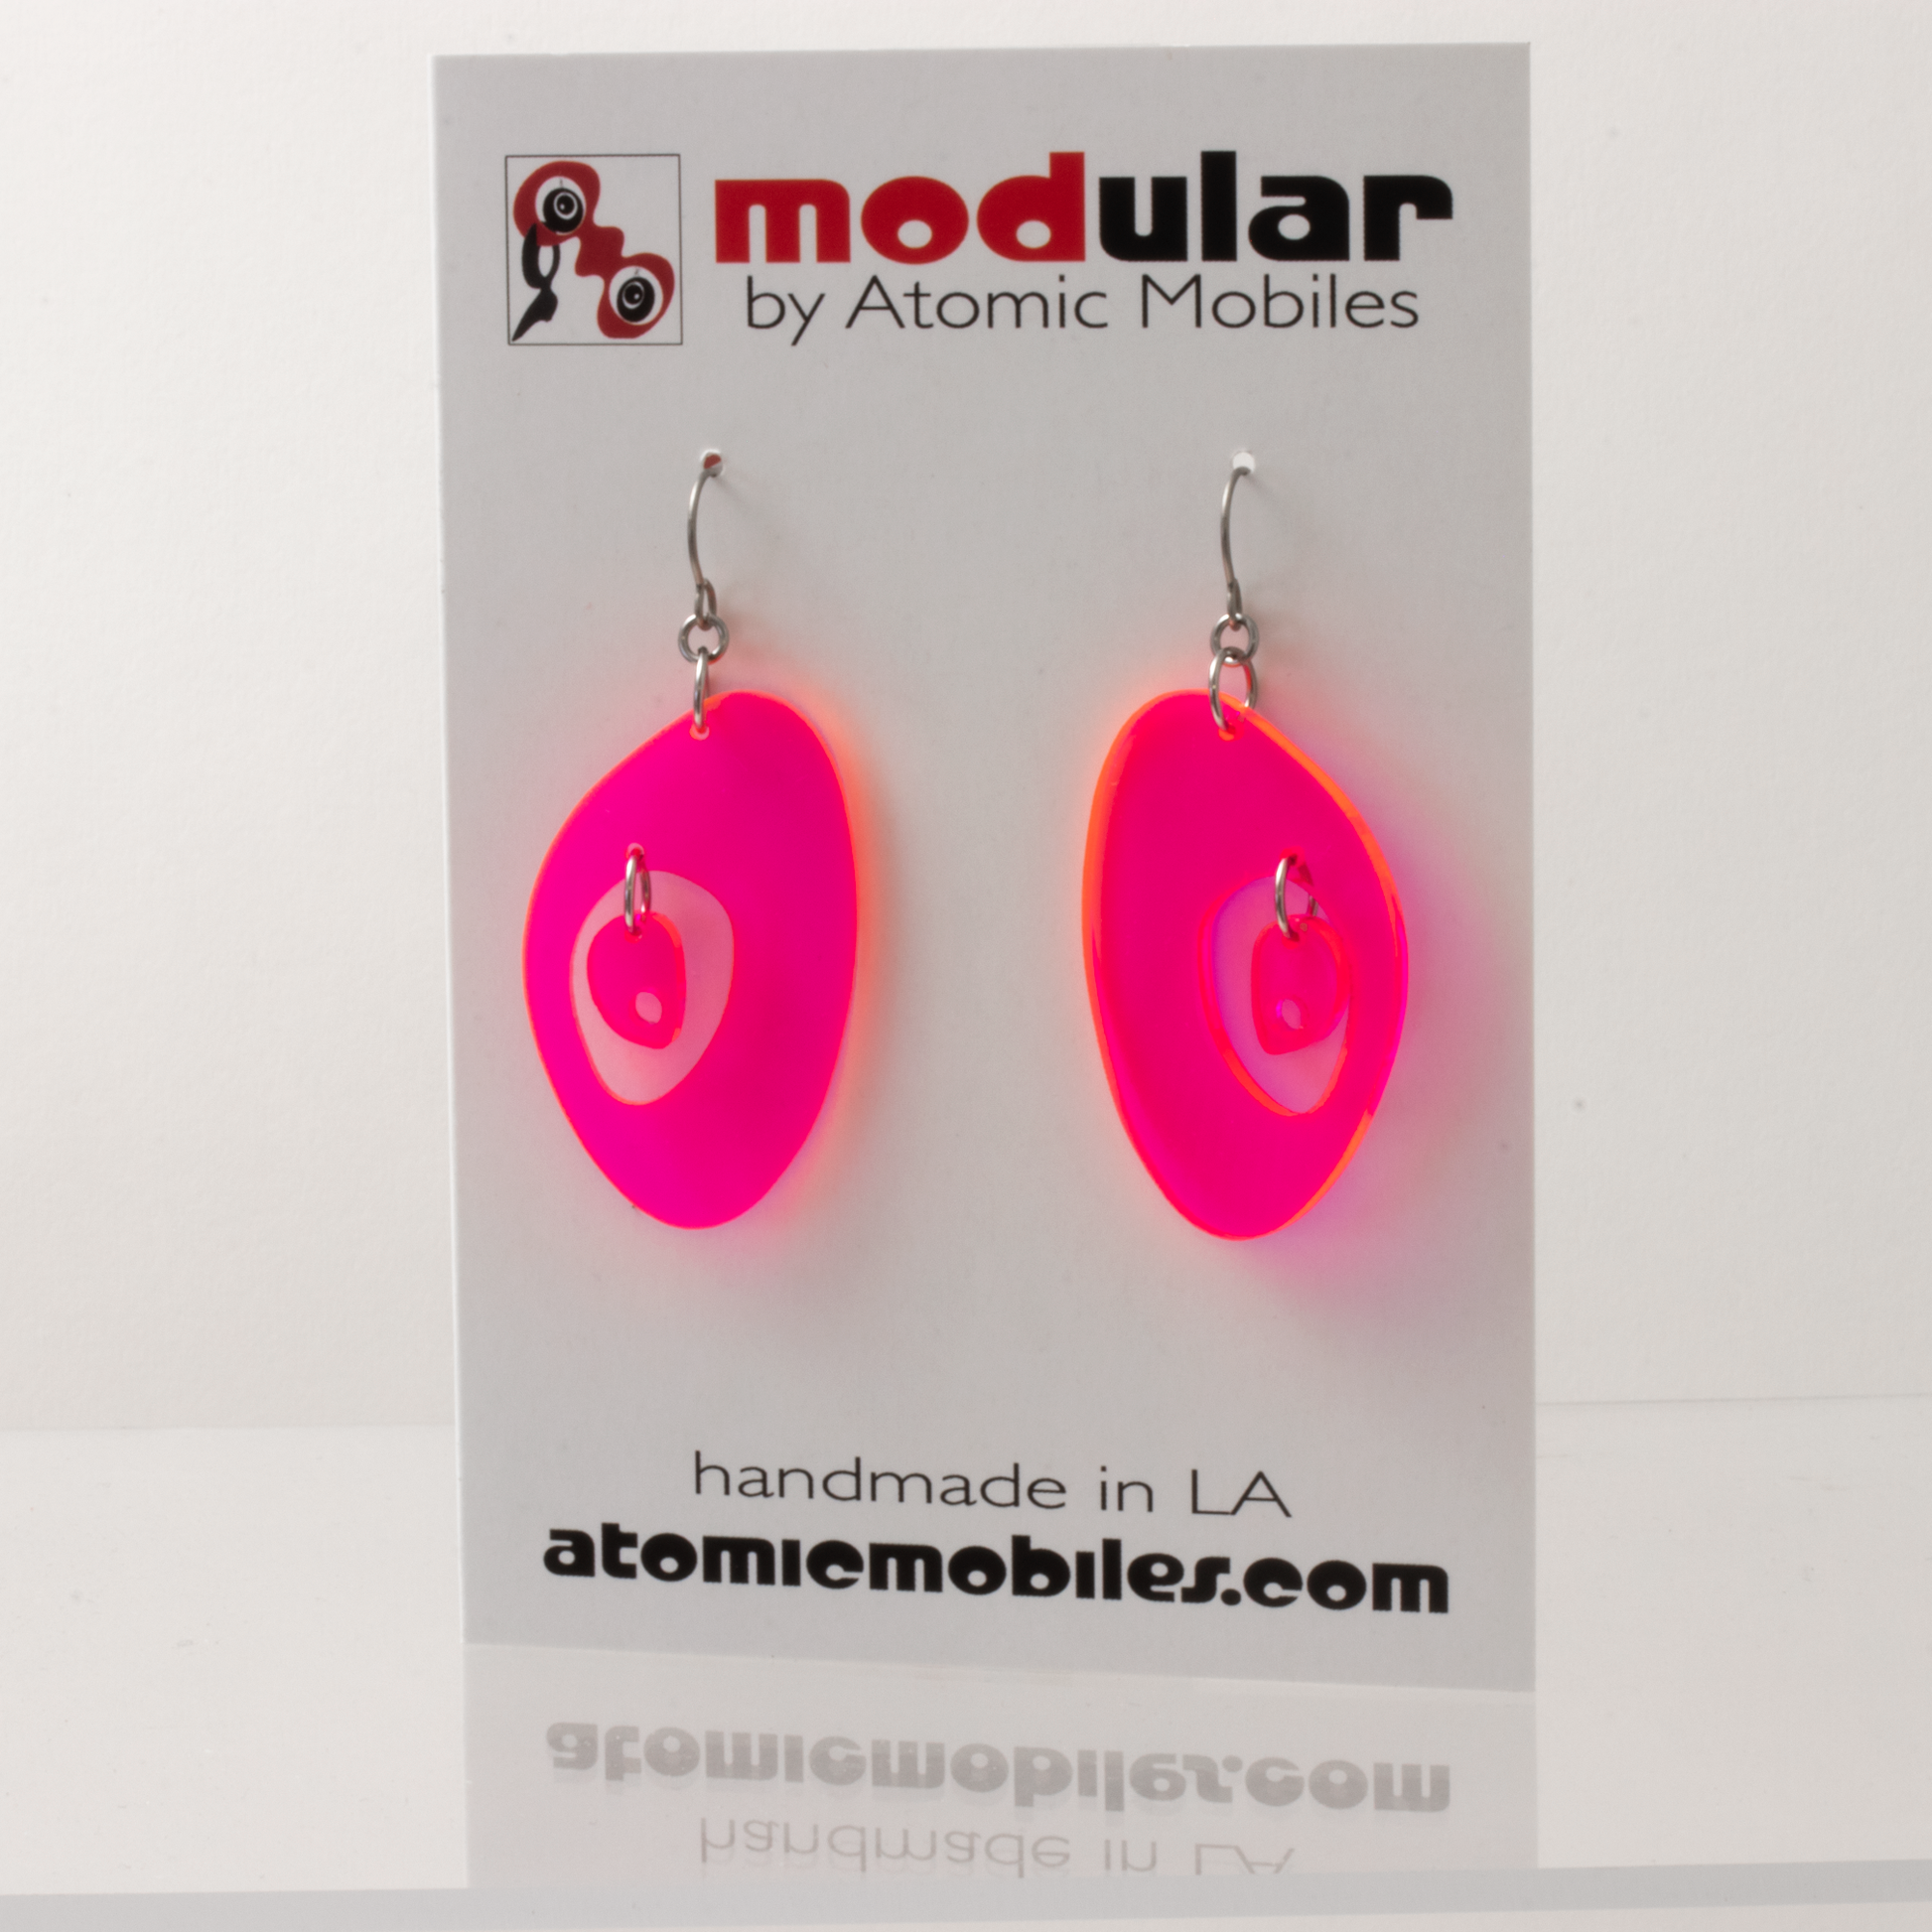 Modernist 1960s Mid Century Modern Style Earrings in Neon Fluorescent Hot Pink plexiglass acrylic by AtomicMobiles.com